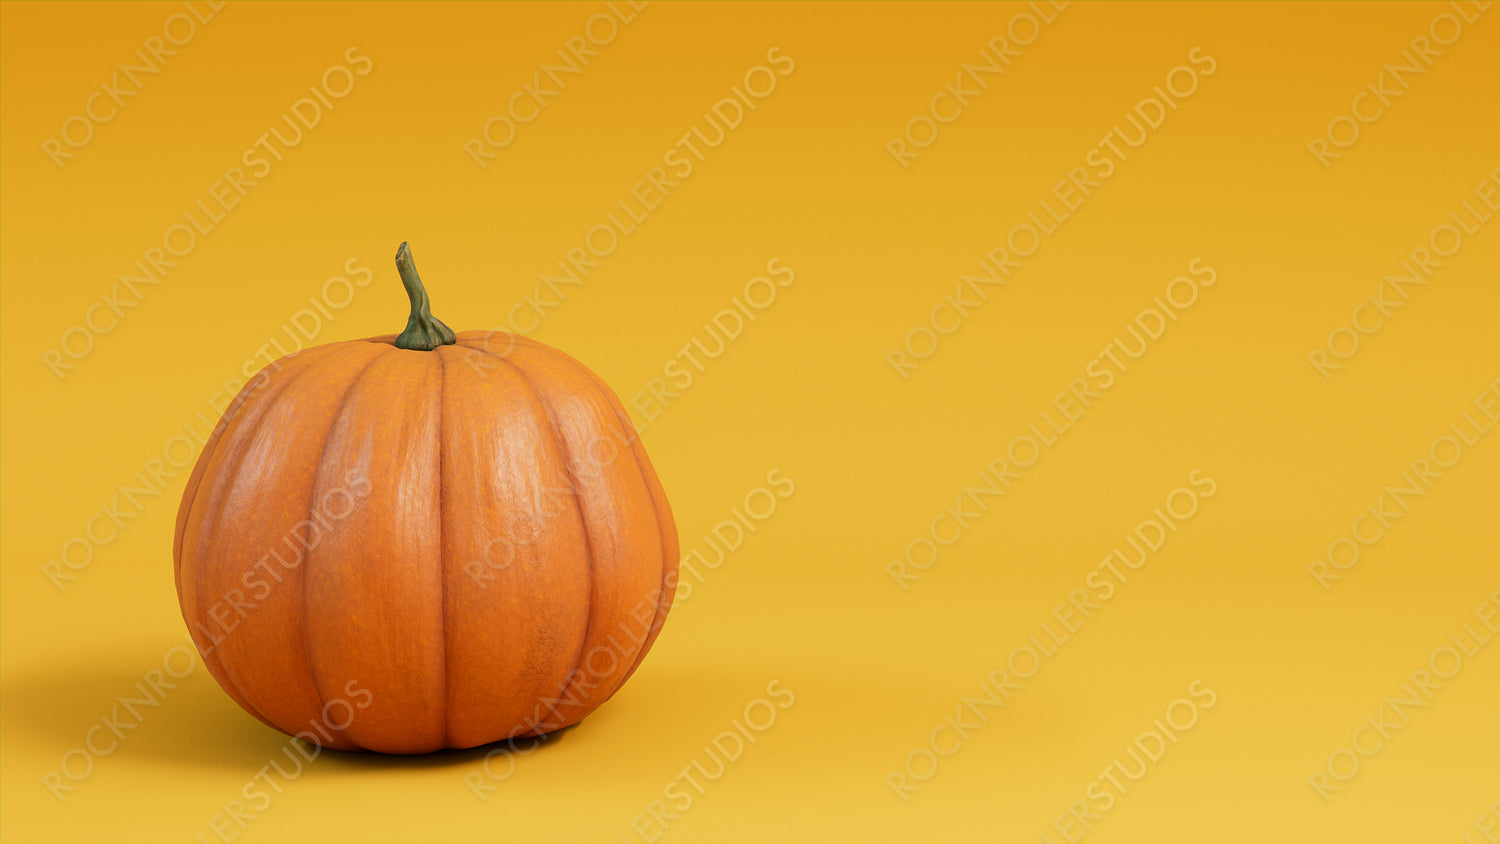 Pumpkin on a Mustard Yellow colored background. Fall themed Image with copy-space.